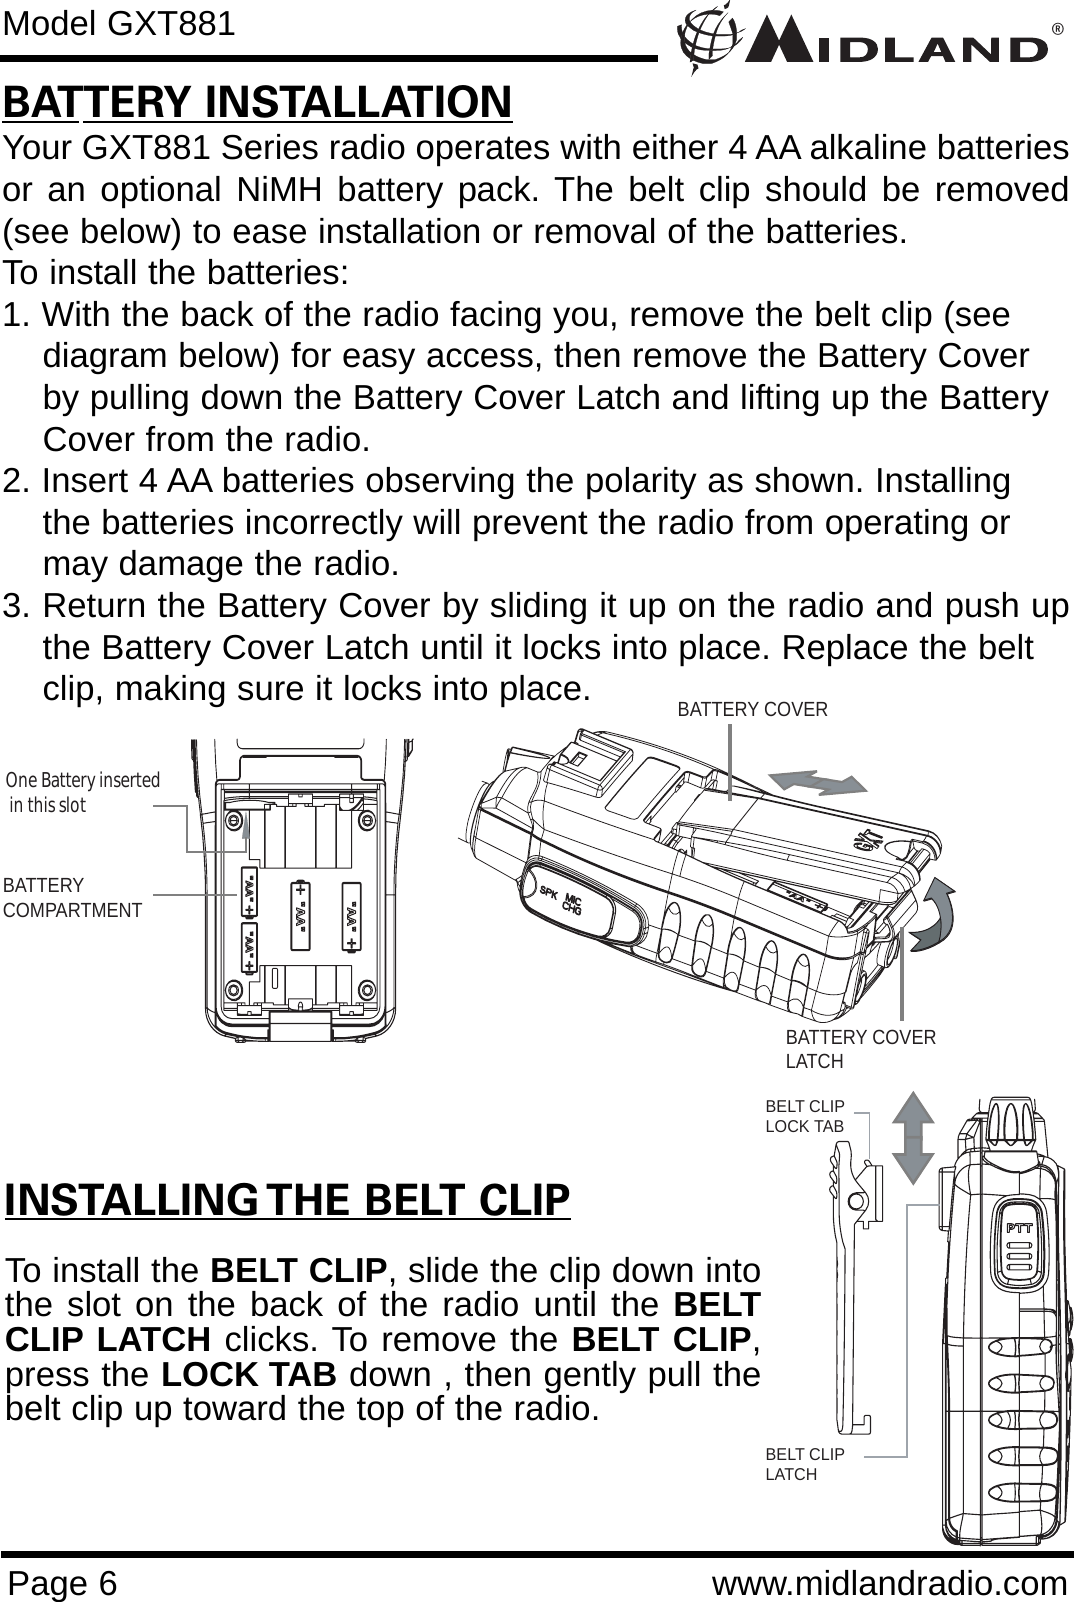 ®Page 6 www.midlandradio.comModel GXT881BATTERY INSTALLATIONYour GXT881 Series radio operates with either 4 AA alkaline batteriesor an optional NiMH battery pack. The belt clip should be removed(see below) to ease installation or removal of the batteries. To install the batteries:1. With the back of the radio facing you, remove the belt clip (see    diagram below) for easy access, then remove the Battery Coverby pulling down the Battery Cover Latch and lifting up the Battery Cover from the radio.2. Insert 4 AA batteries observing the polarity as shown. Installingthe batteries incorrectly will prevent the radio from operating ormay damage the radio.3. Return the Battery Cover by sliding it up on the radio and push upthe Battery Cover Latch until it locks into place. Replace the belt clip, making sure it locks into place.INSTALLING THE BELT CLIPTo install the BELT CLIP, slide the clip down intothe slot on the back of the radio until the BELTCLIP LATCH clicks. To remove the BELT CLIP,press the LOCK TAB down , then gently pull thebelt clip up toward the top of the radio.BATTERYCOMPARTMENTOne Battery inserted  in this slotBATTERY COVERBATTERY COVERLATCHBELT CLIPLOCK TABBELT CLIP LATCH